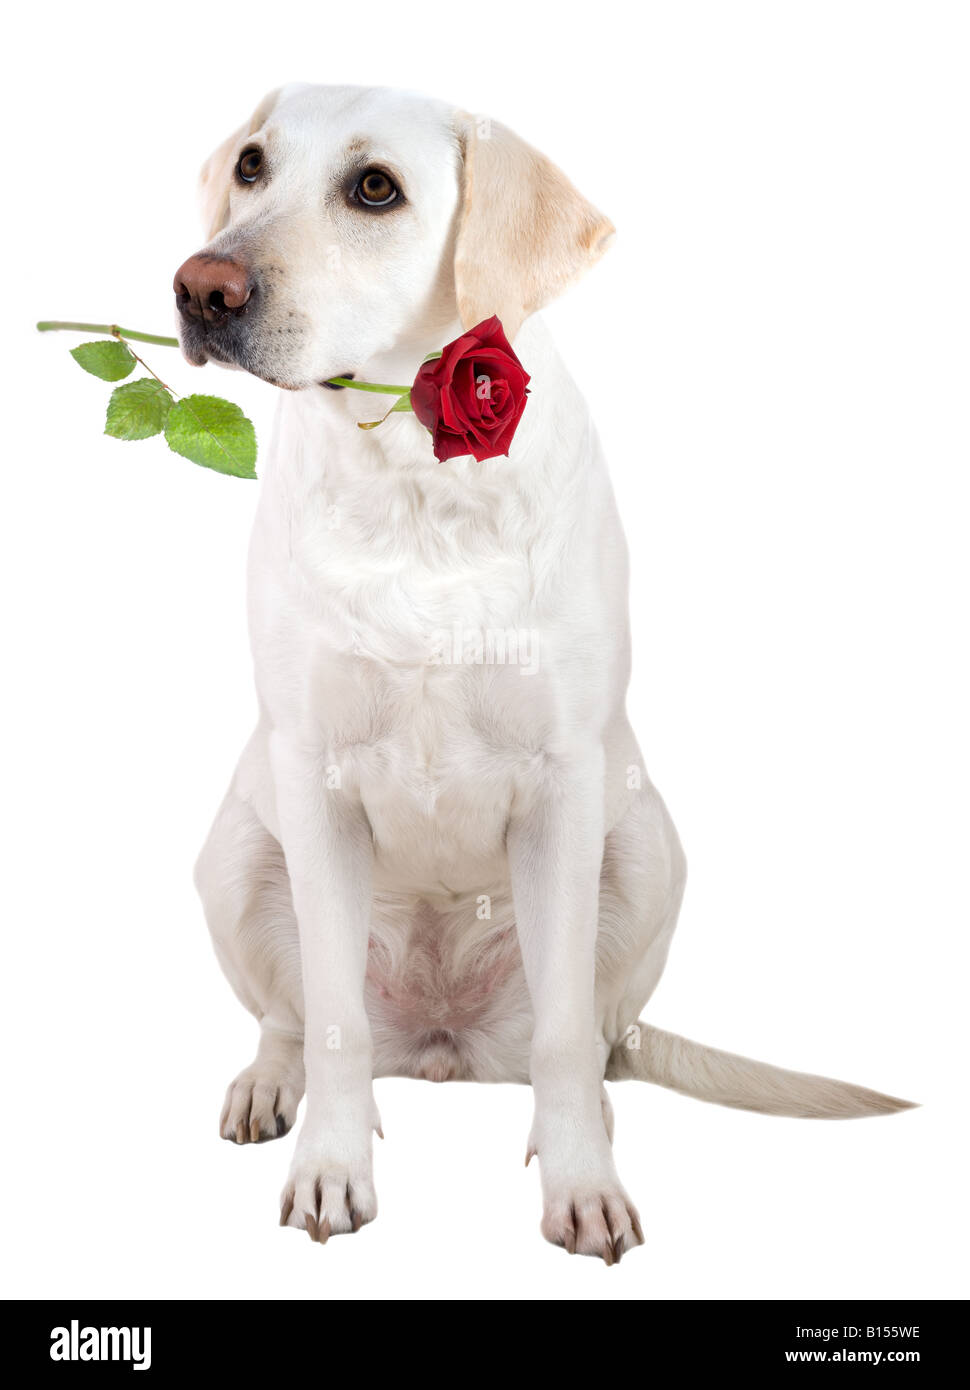 Devotedly looking white labrador retriever with a red rose in maw on white background with soft shadow. Stock Photo